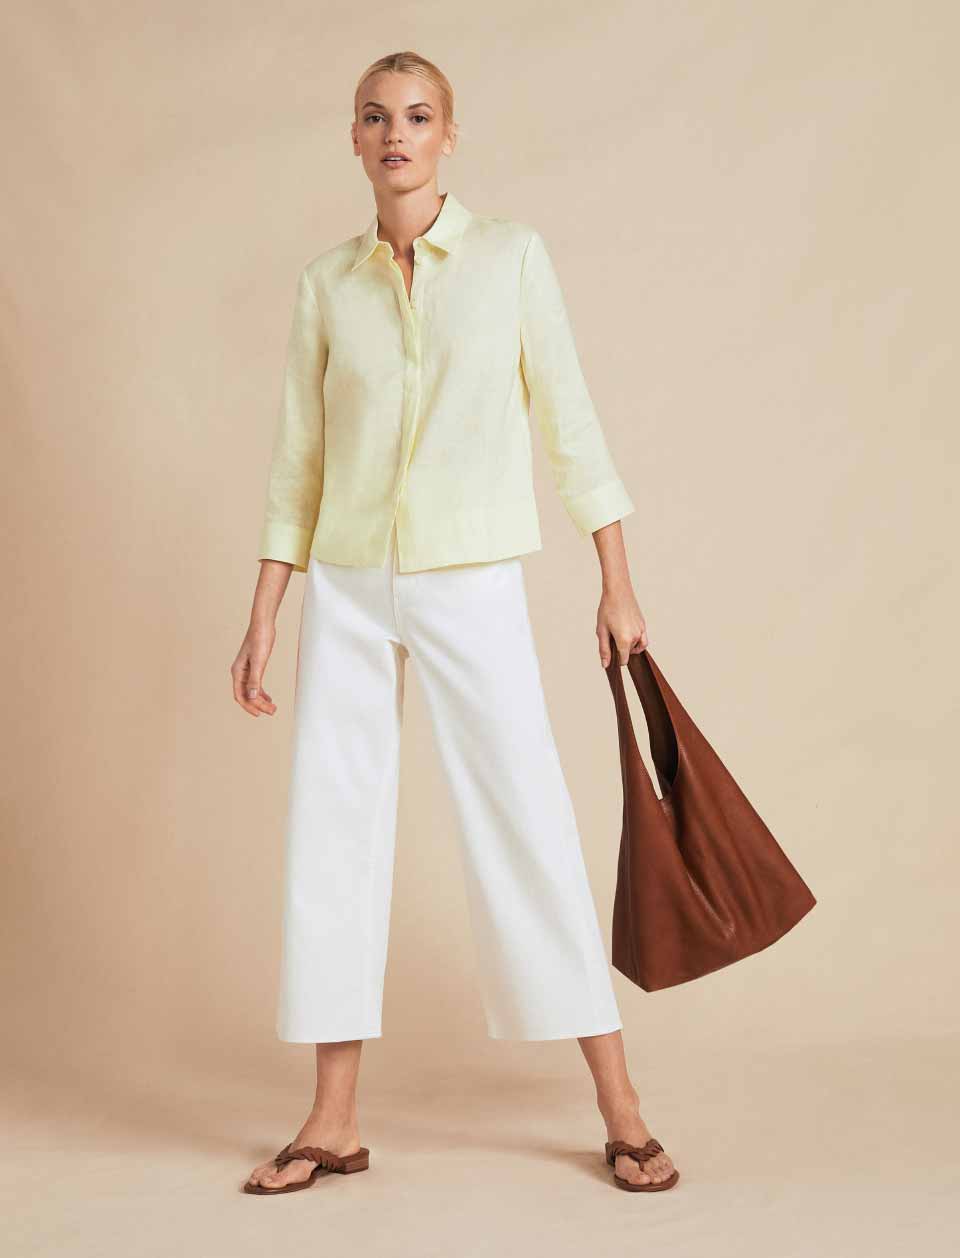 Model photographed in front of a beige background wearing a yellow linen shirt and white cropped jeans.